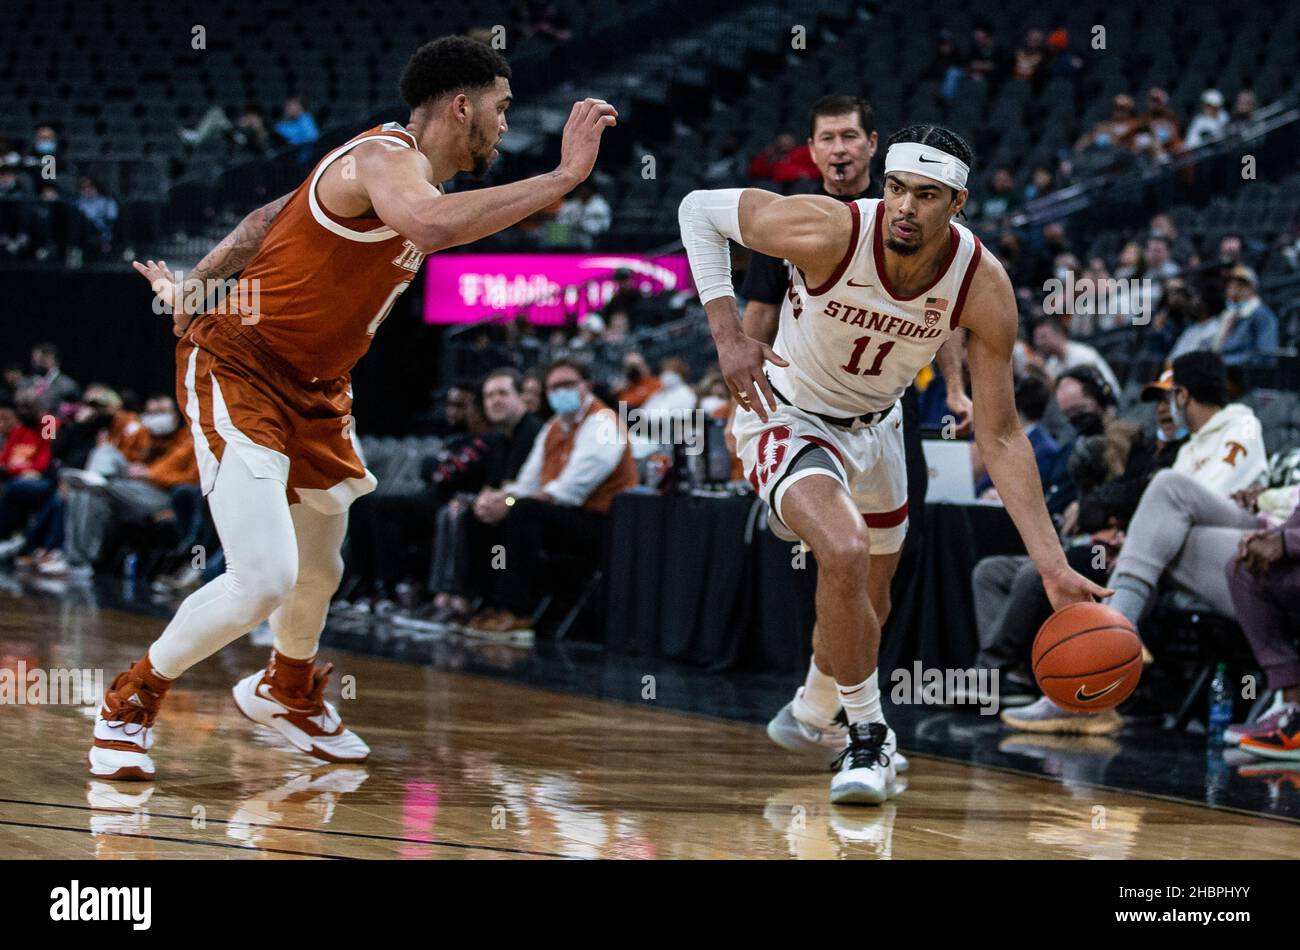 December 19 2021 Las Vegas, NV U.S.A. Stanford forward Jaiden Delaire (11) goes to the basket during the NCAA MenÕs Basketball Pac 12 Coast to Coast game between Stanford Cardinal and the Texas Longhorn.Texas beat Stanford 60-53 at T-Mobile Arena Las Vegas, NV. Thurman James/CSM Stock Photo